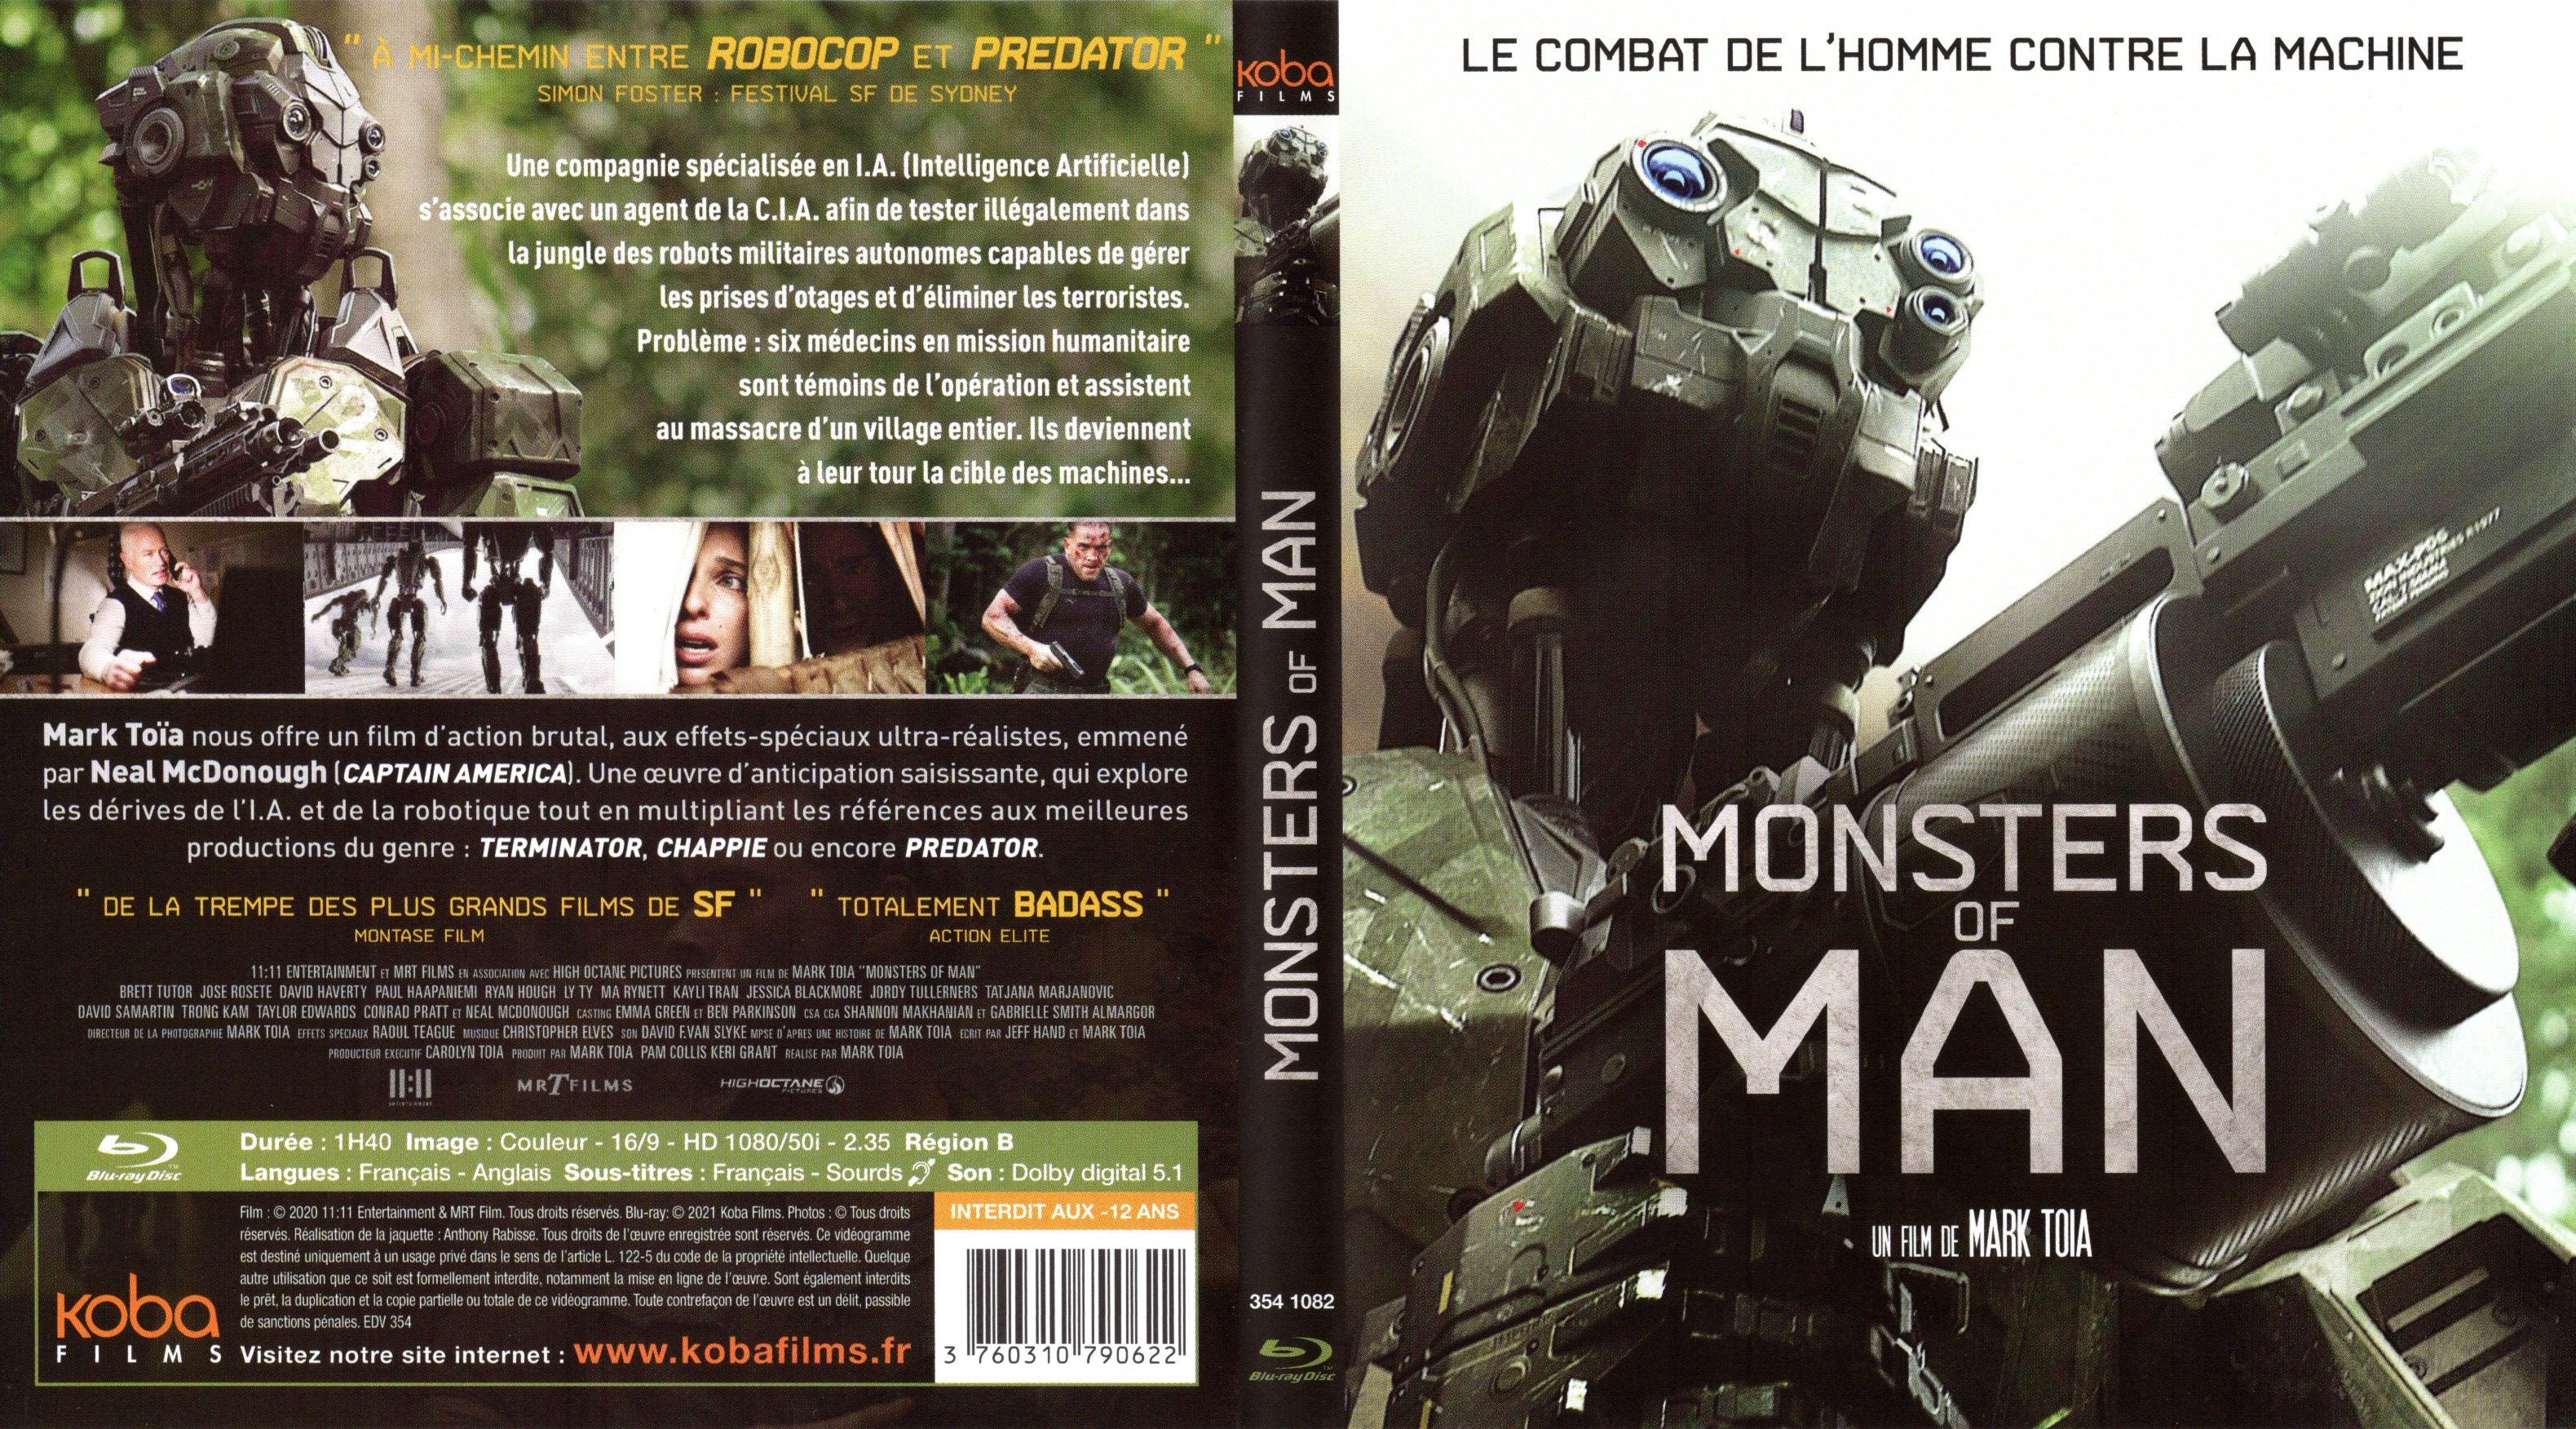 Jaquette DVD Monsters of man (BLU-RAY)